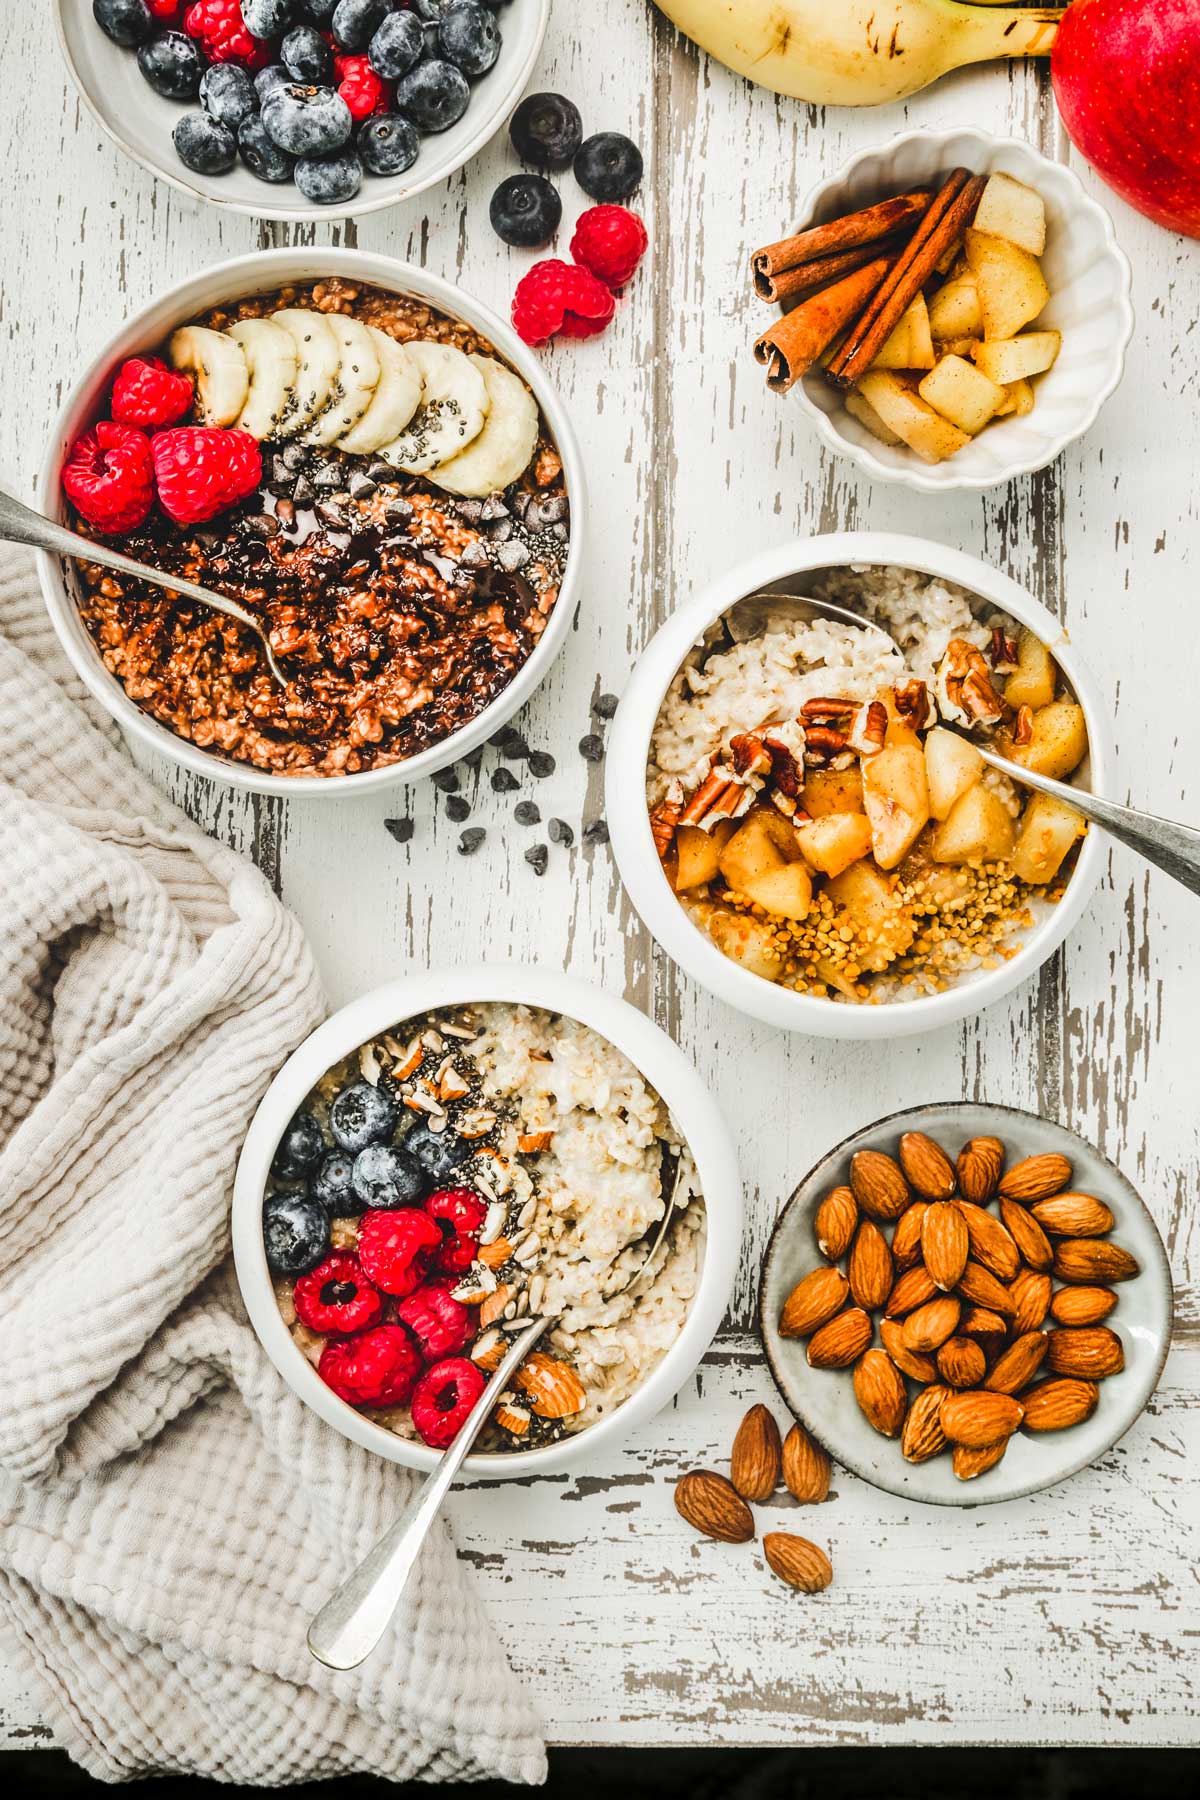 Table with bowl, oatmeal porridge and fruits